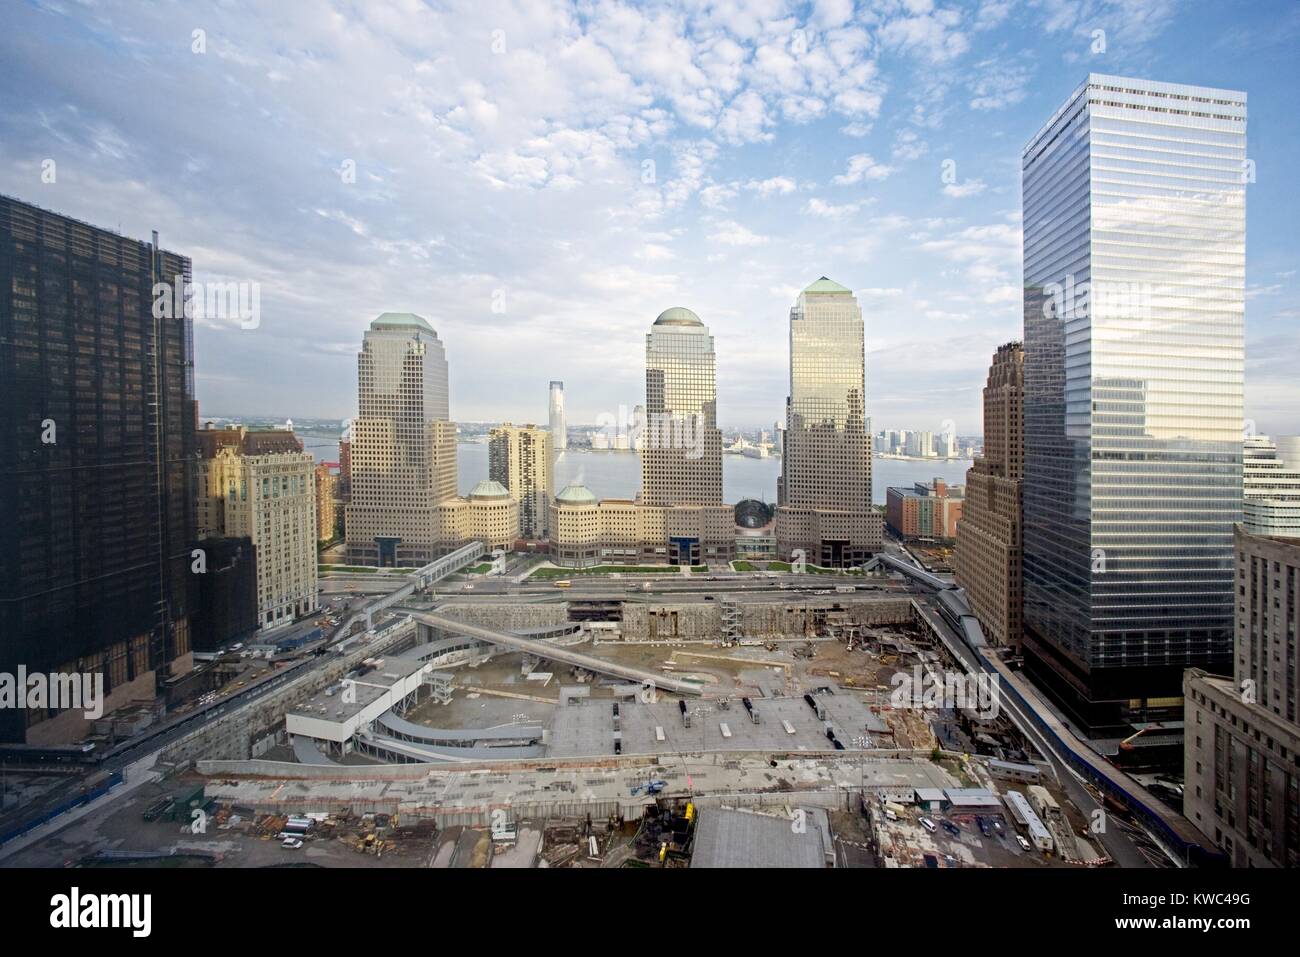 The 16 acre World Trade Center site cleared and prepared for reconstruction. The new WTC will include One World Trade Center (Freedom Tower), memorial pools on the footprints of the Twin Towers and a 9-11 Museum. At right is the new WTC 7, replacing the third WTC skyscraper to collapse on Sept. 11, 2001. May 20, 2006. Photo by Carol Highsmith. (BSLOC 2015 2 126) Removed as per Ron's request 7/27/2016 --BD Stock Photo